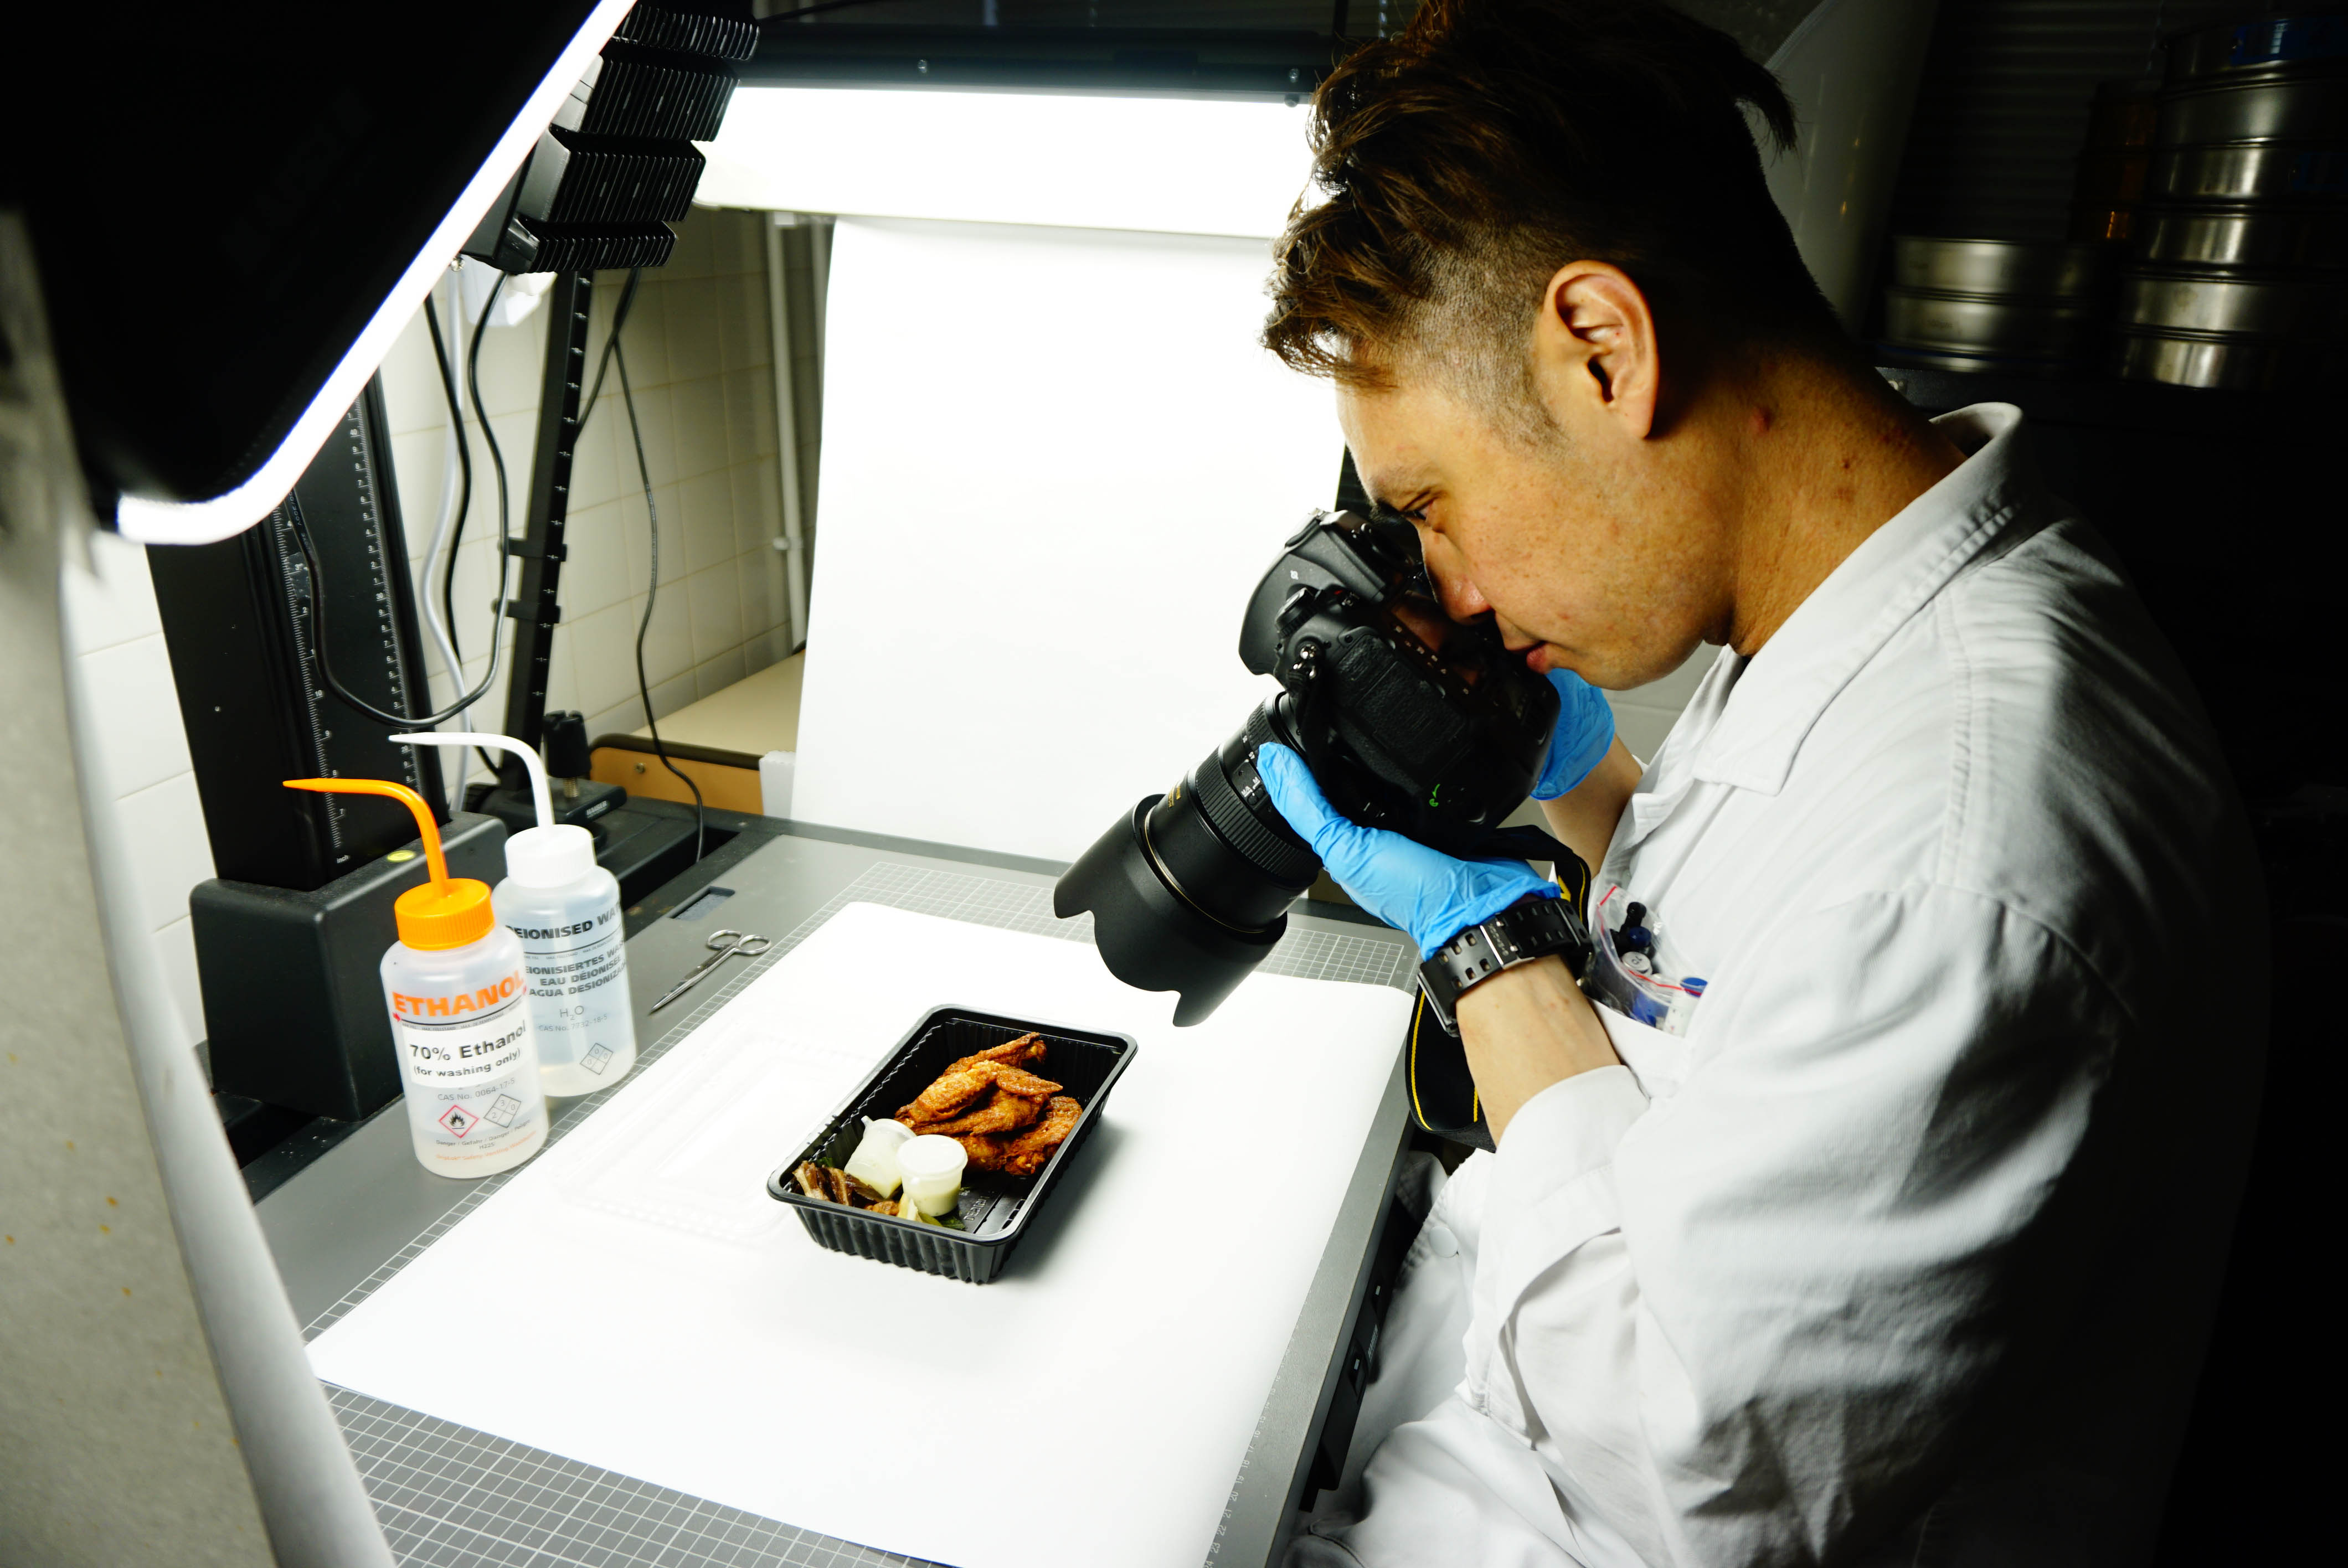 A staff is taking photos from a sample